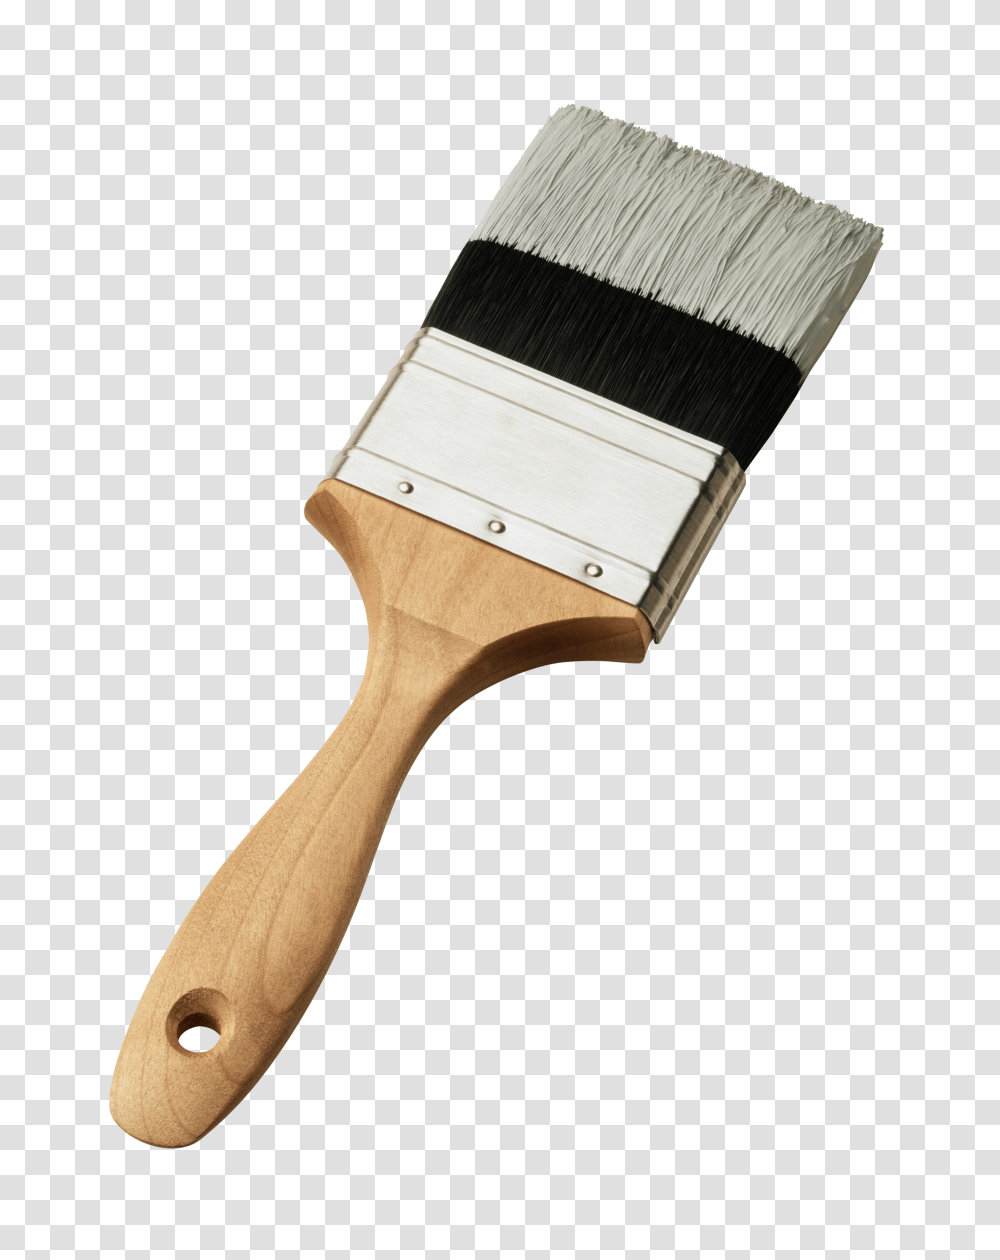 Orange Paint Brush Paint Brush With Background, Tool, Toothbrush Transparent Png